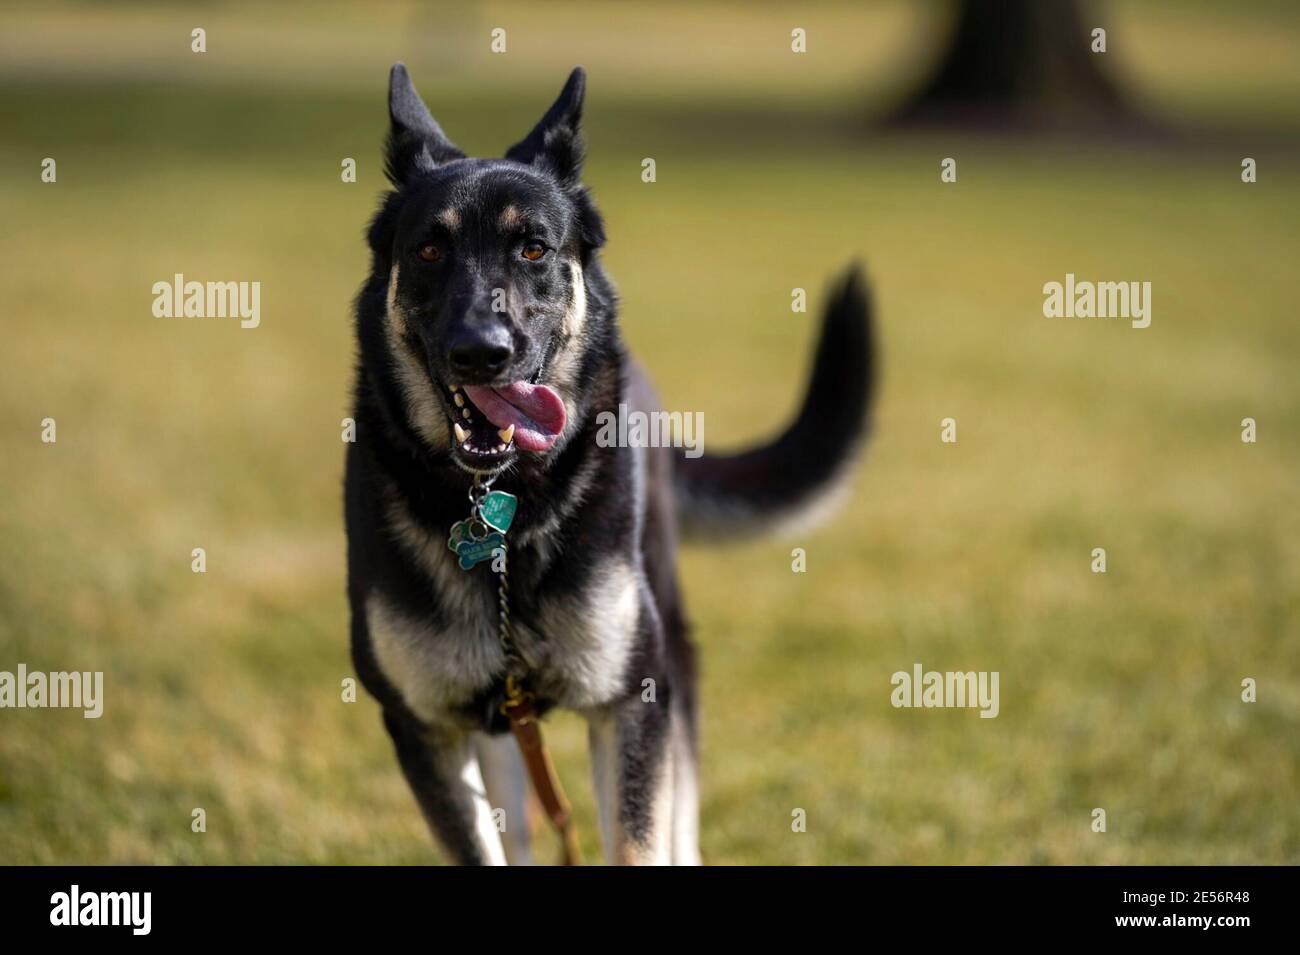 Major Biden, a rescue dog owned by U.S President Joe Biden runs around the South Lawn of the White House January 24, 2021 in Washington, D.C. The Bidens adopted the German shepherd in 2018 from the Delaware Humane Association. Stock Photo